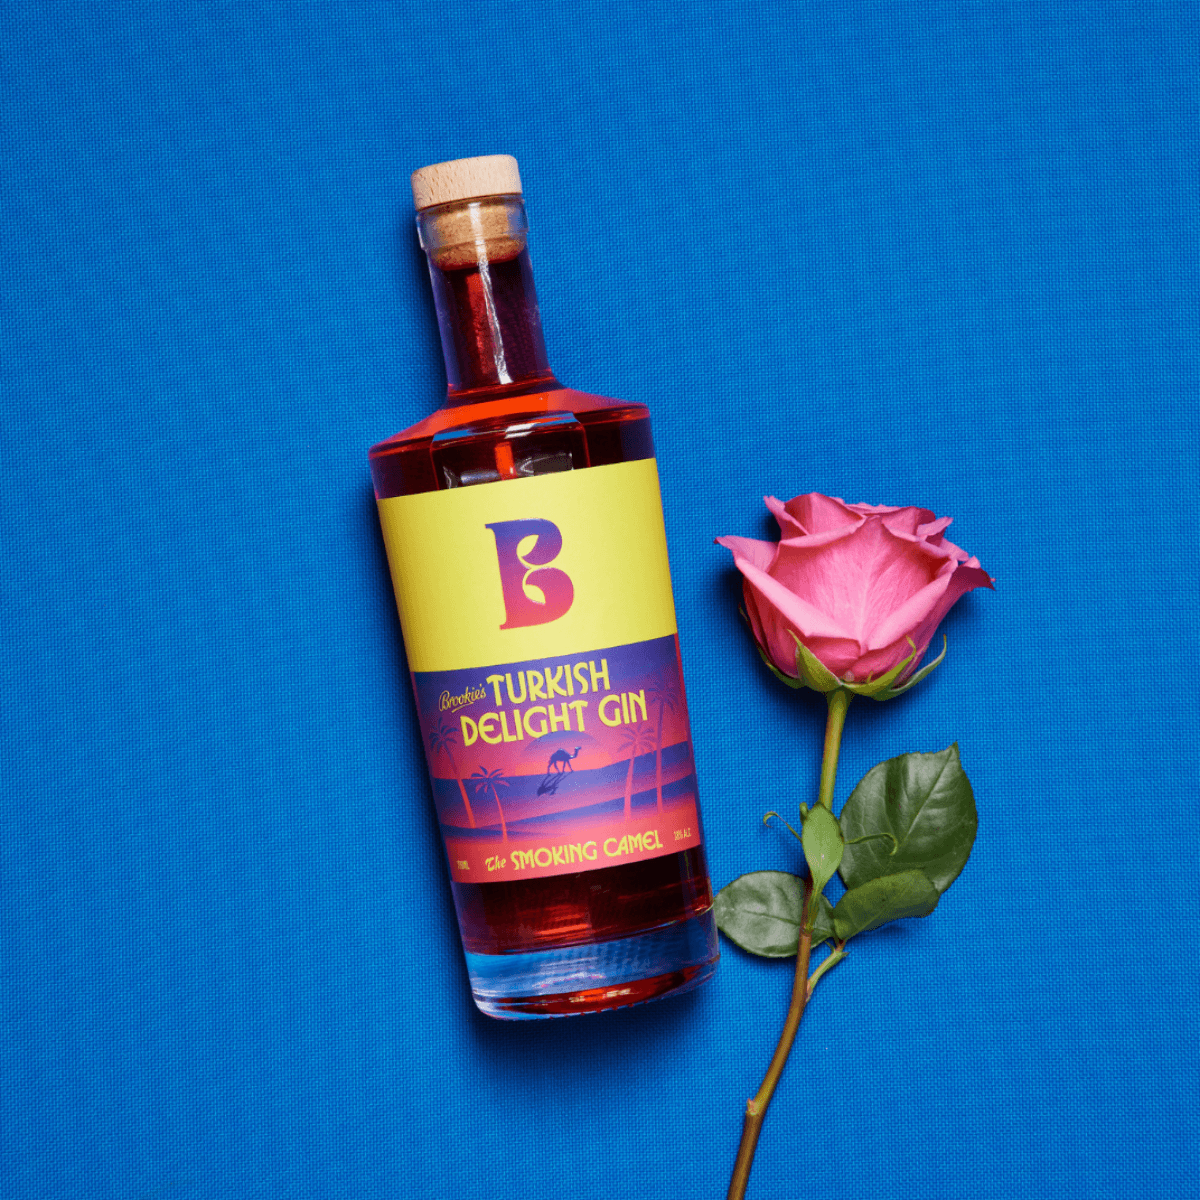 A bottle of pink gin placed beside a delicate rose, creating a charming and elegant composition.